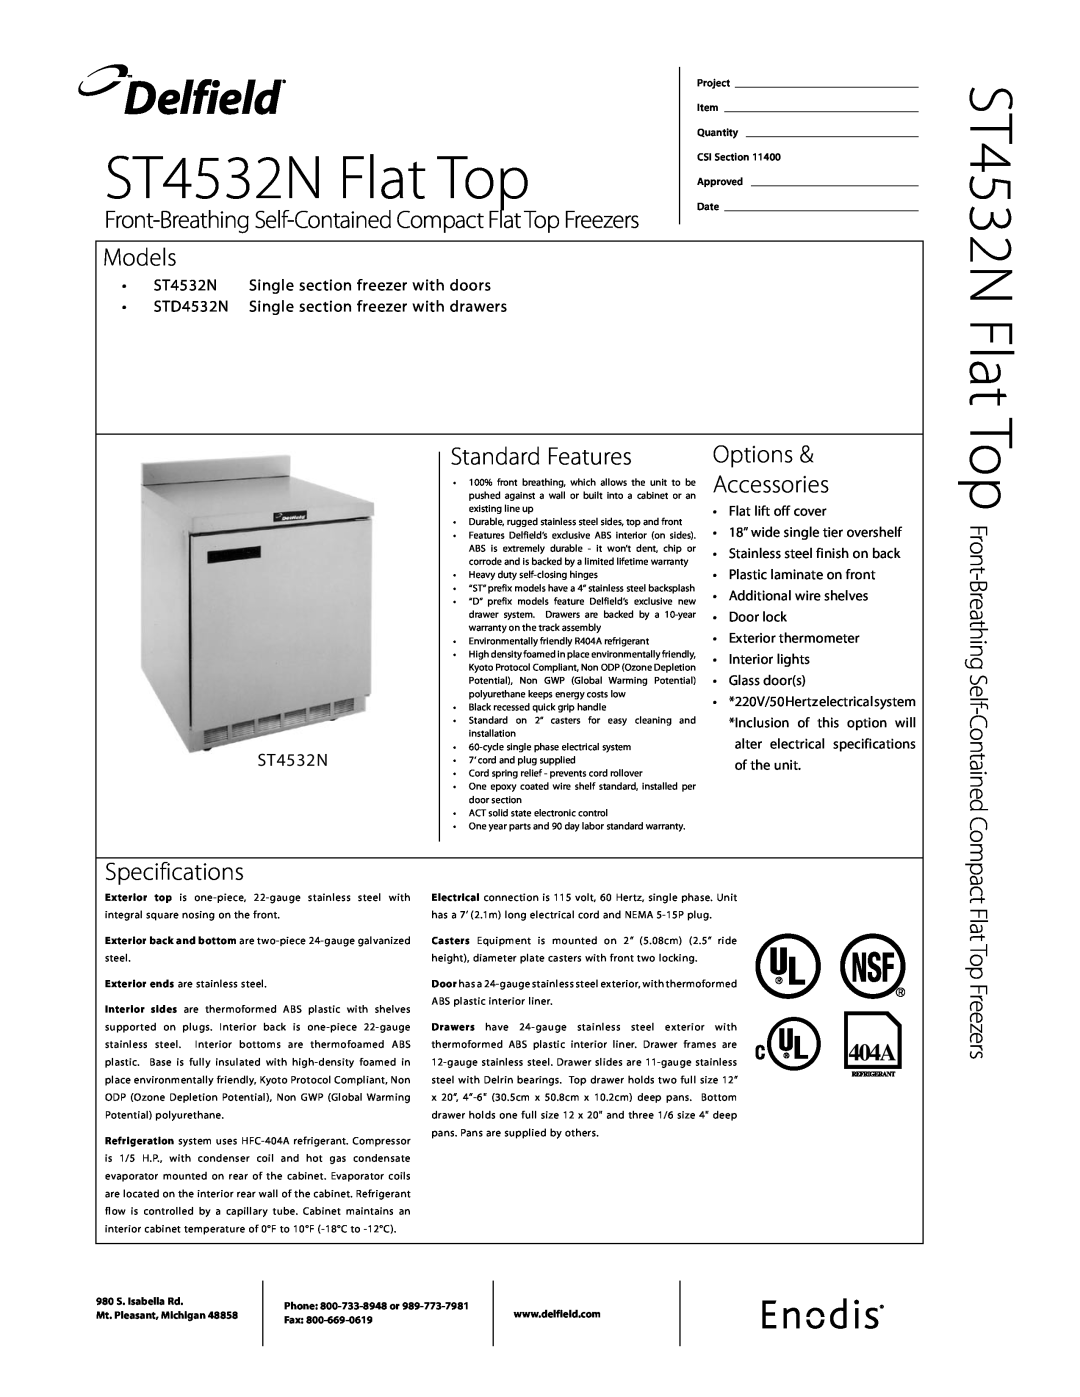 Delfield specifications ST4532N Single section freezer with doors, STD4532N Single section freezer with drawers, Models 